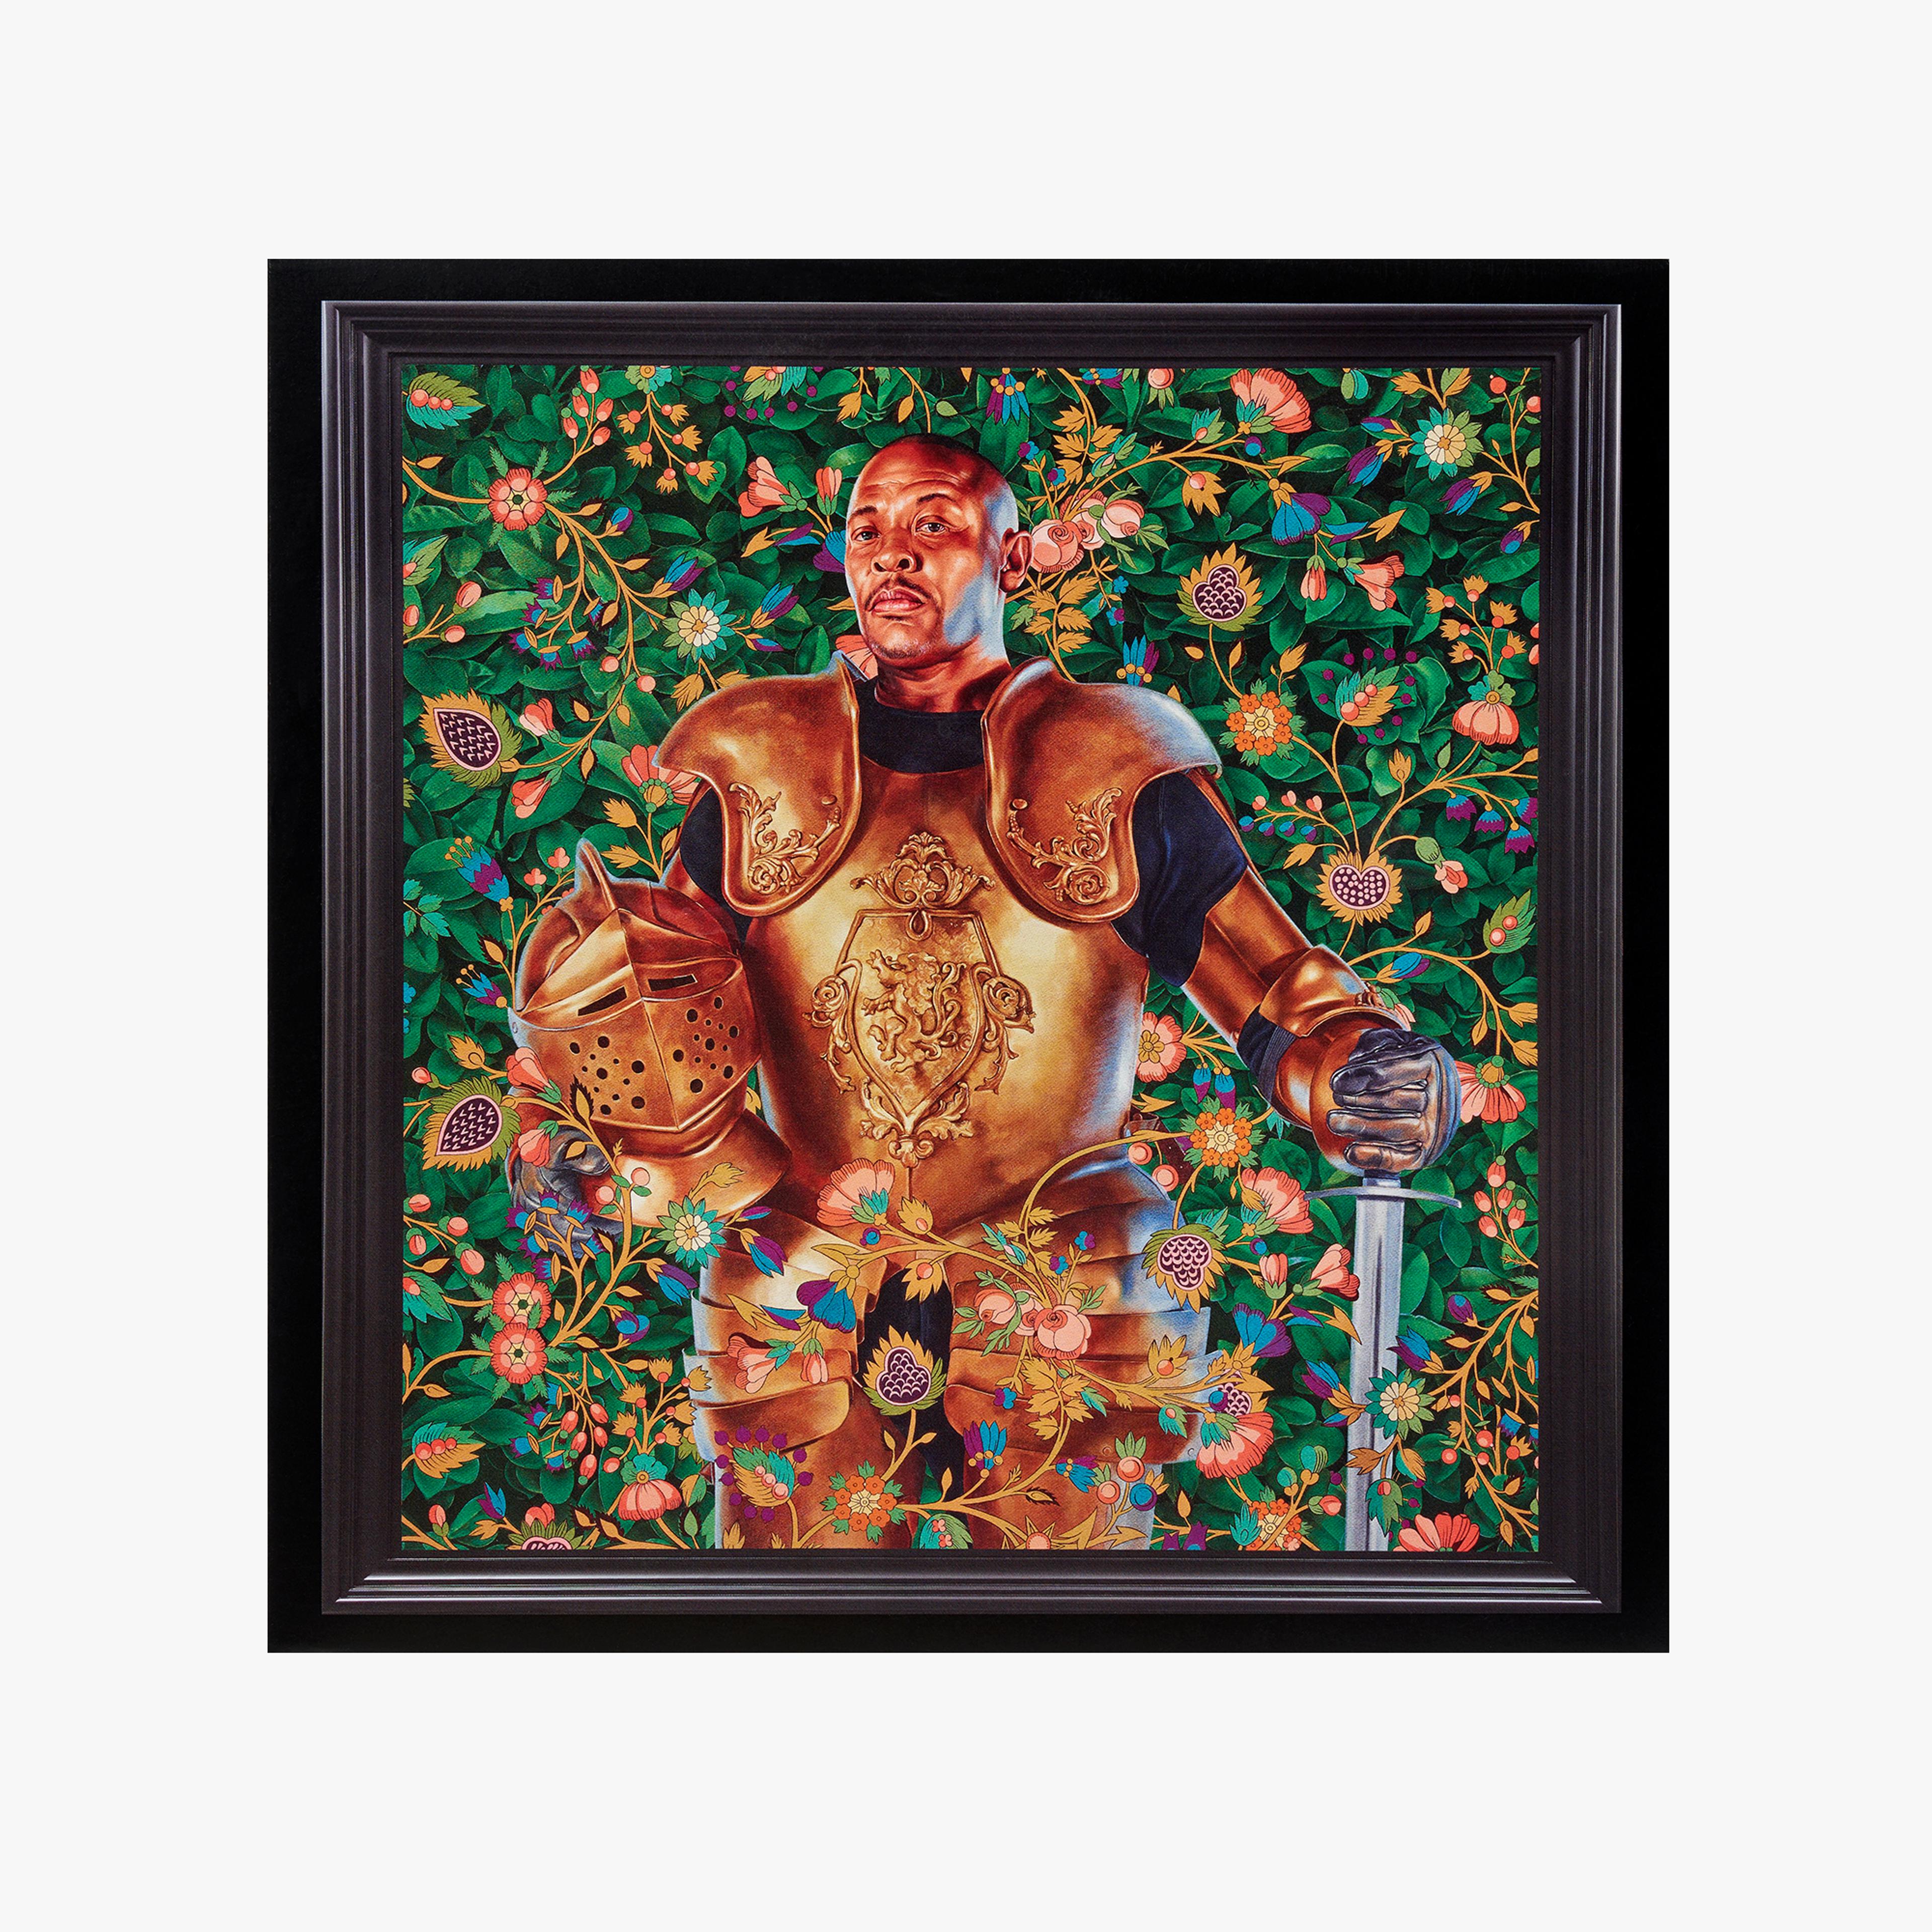 Alternate View 3 of Dr. Dre - 2001 by Kehinde Wiley Gallery Picture Disc